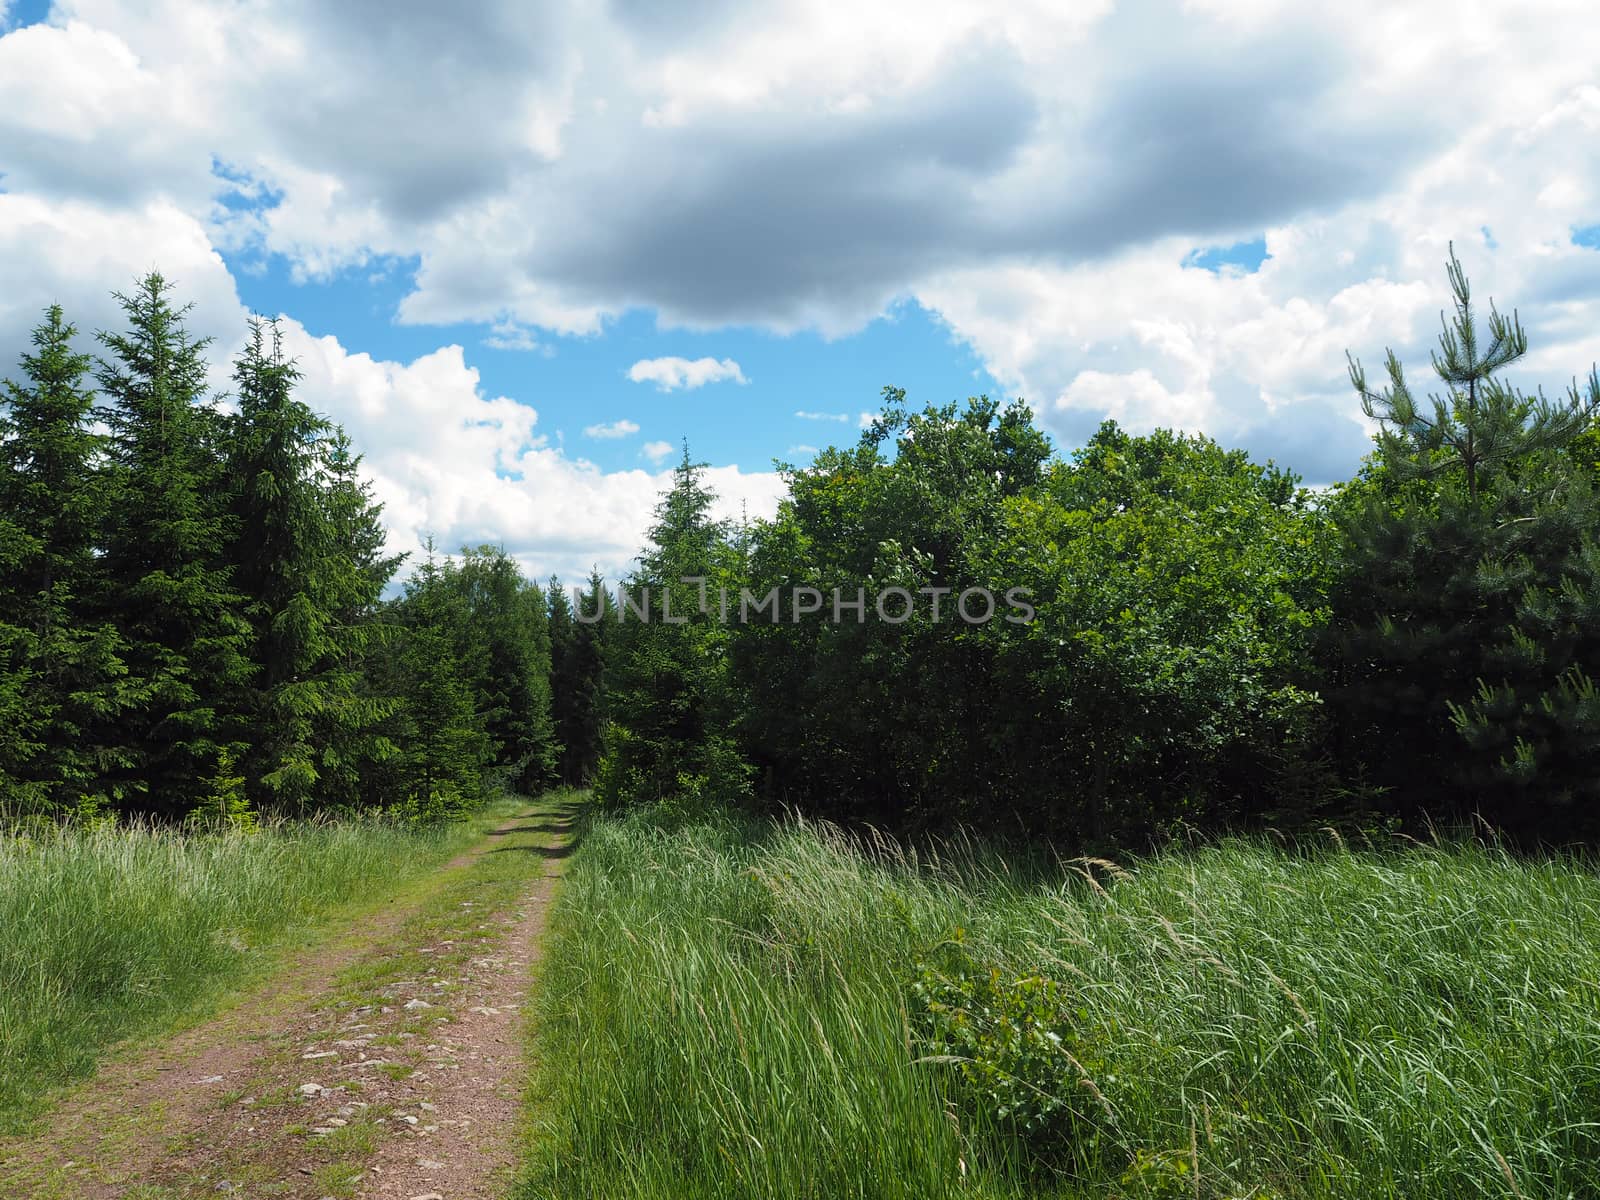 footpath in the spring assorted forest with white clouds bacground